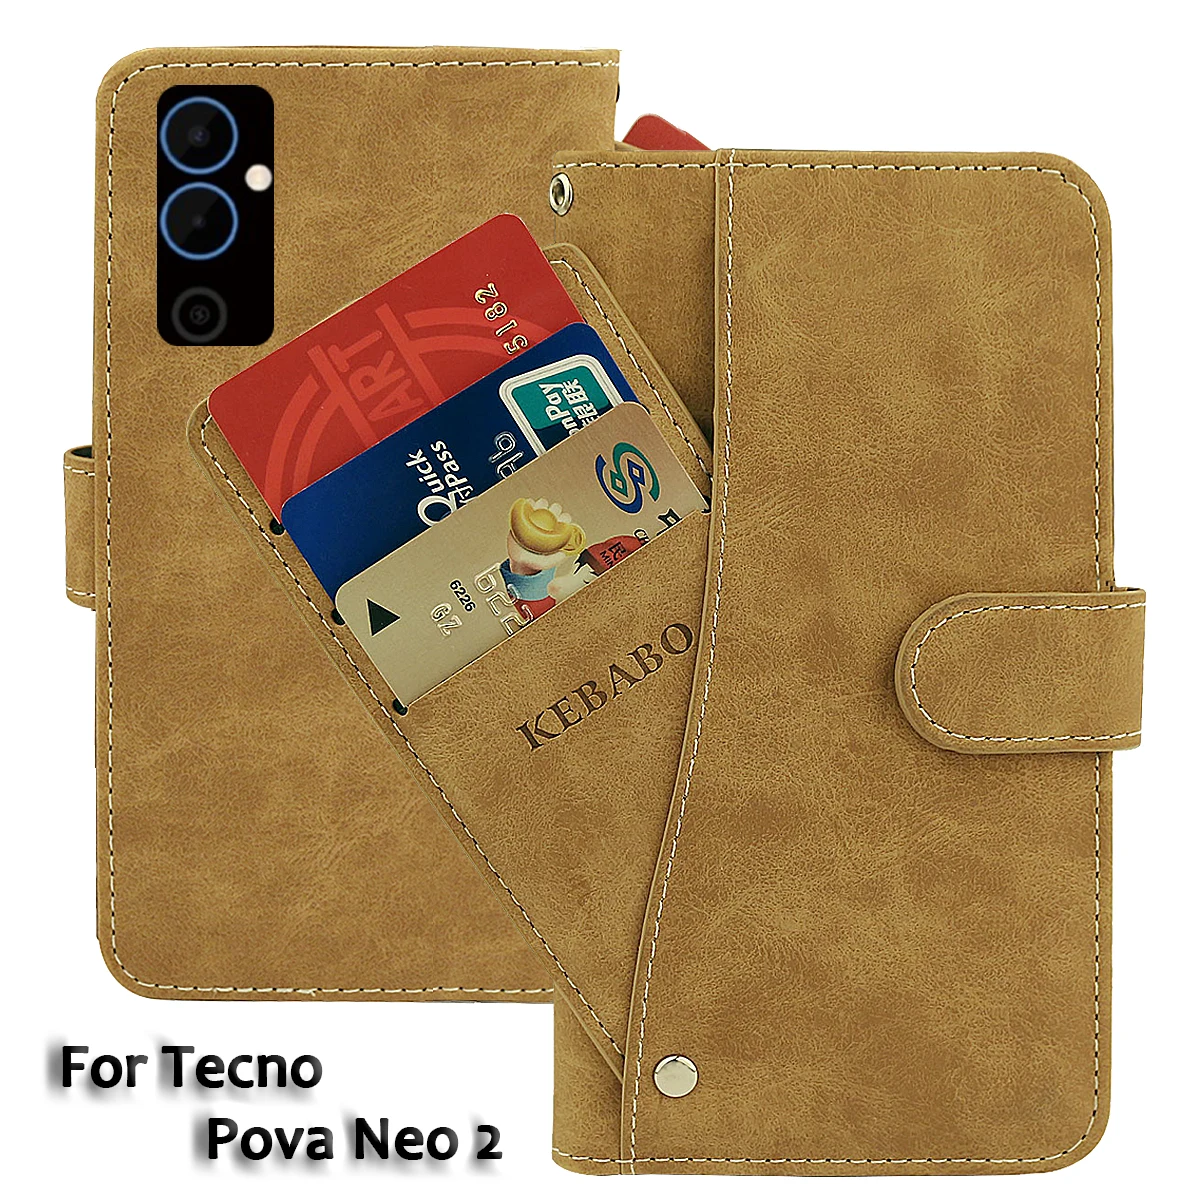 

Vintage Leather Wallet Tecno Pova Neo 2 Case 6.82" Flip Luxury Card Slots Cover Magnet Phone Protective Cases Bags